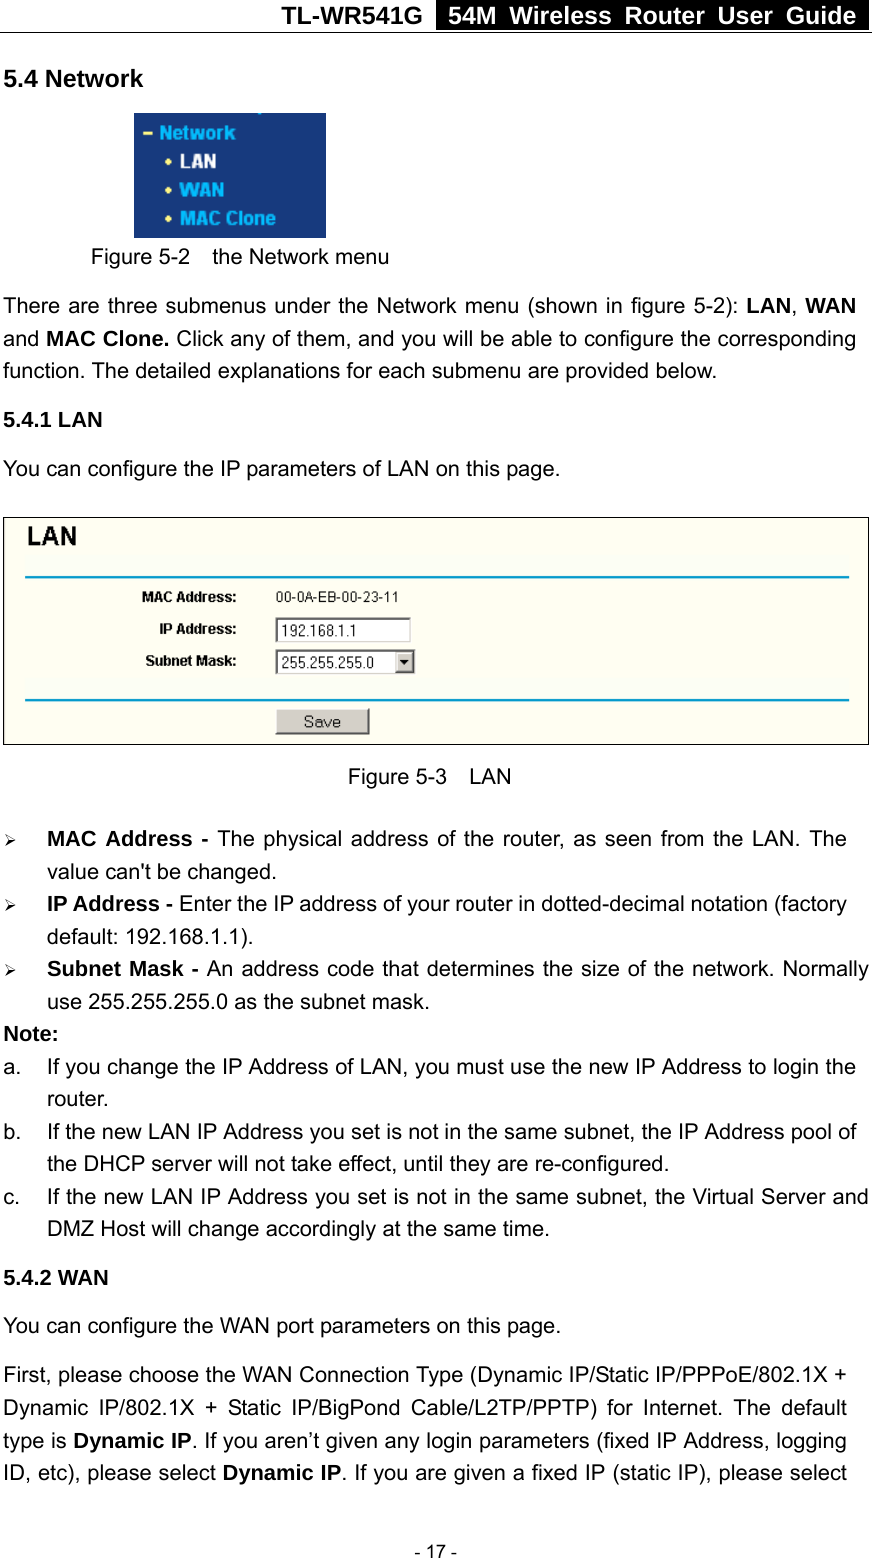 TL-WR541G   54M Wireless Router User Guide  5.4 Network      Figure 5-2    the Network menu There are three submenus under the Network menu (shown in figure 5-2): LAN, WAN and MAC Clone. Click any of them, and you will be able to configure the corresponding function. The detailed explanations for each submenu are provided below. 5.4.1 LAN You can configure the IP parameters of LAN on this page.    Figure 5-3  LAN ¾ MAC Address - The physical address of the router, as seen from the LAN. The value can&apos;t be changed. ¾ IP Address - Enter the IP address of your router in dotted-decimal notation (factory default: 192.168.1.1). ¾ Subnet Mask - An address code that determines the size of the network. Normally use 255.255.255.0 as the subnet mask.   Note:  a.  If you change the IP Address of LAN, you must use the new IP Address to login the router.  b.  If the new LAN IP Address you set is not in the same subnet, the IP Address pool of the DHCP server will not take effect, until they are re-configured. c.  If the new LAN IP Address you set is not in the same subnet, the Virtual Server and DMZ Host will change accordingly at the same time. 5.4.2 WAN You can configure the WAN port parameters on this page. First, please choose the WAN Connection Type (Dynamic IP/Static IP/PPPoE/802.1X + Dynamic IP/802.1X + Static IP/BigPond Cable/L2TP/PPTP) for Internet. The default type is Dynamic IP. If you aren’t given any login parameters (fixed IP Address, logging ID, etc), please select Dynamic IP. If you are given a fixed IP (static IP), please select  - 17 - 